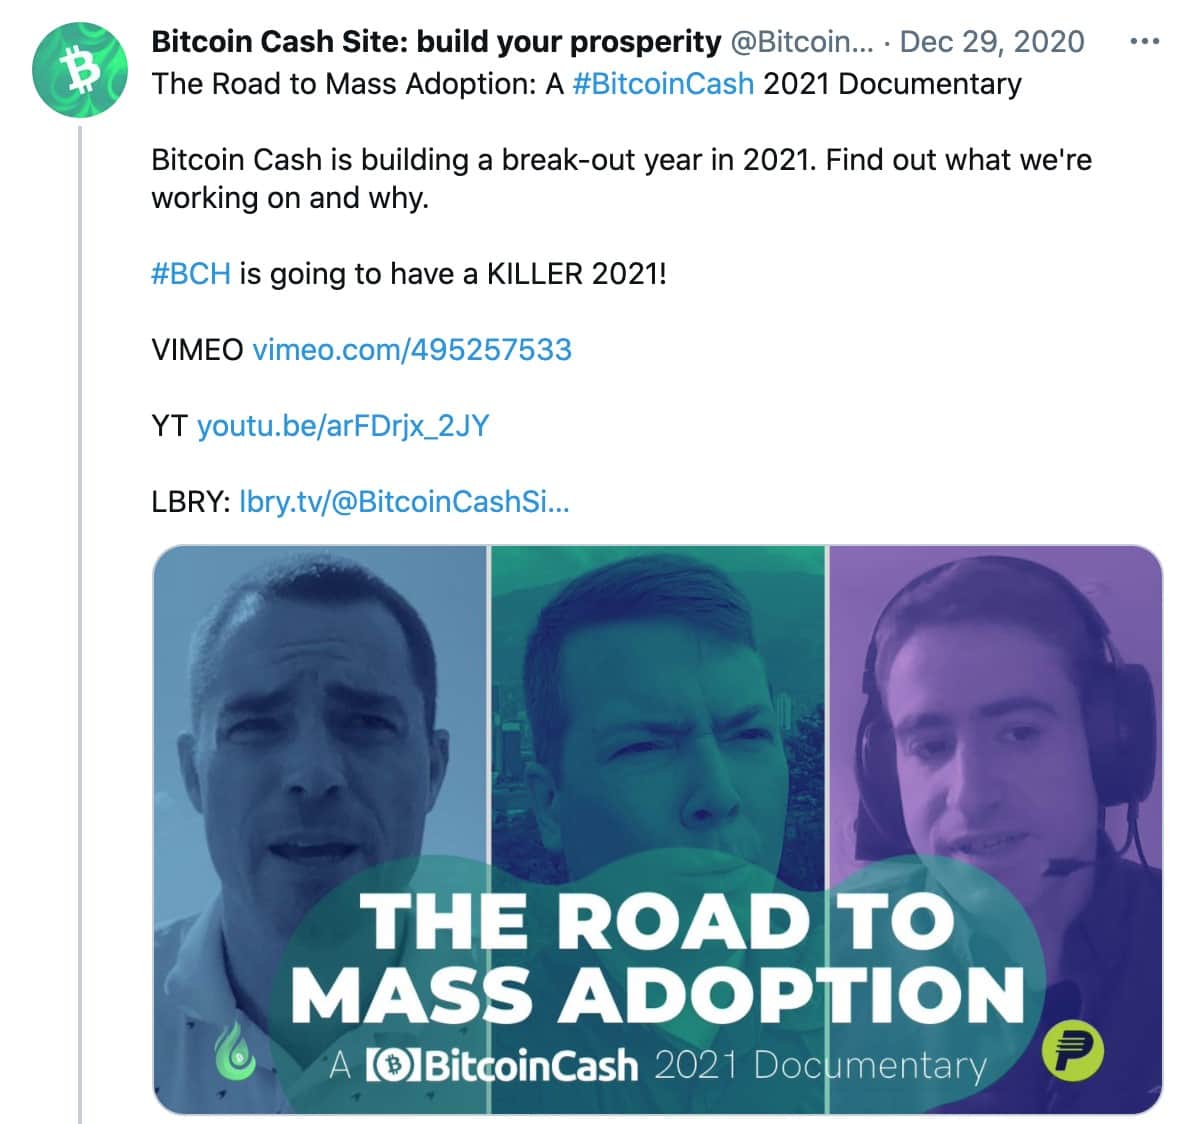 The documentary Bitcoin Cash: The Road to Mass Adoption